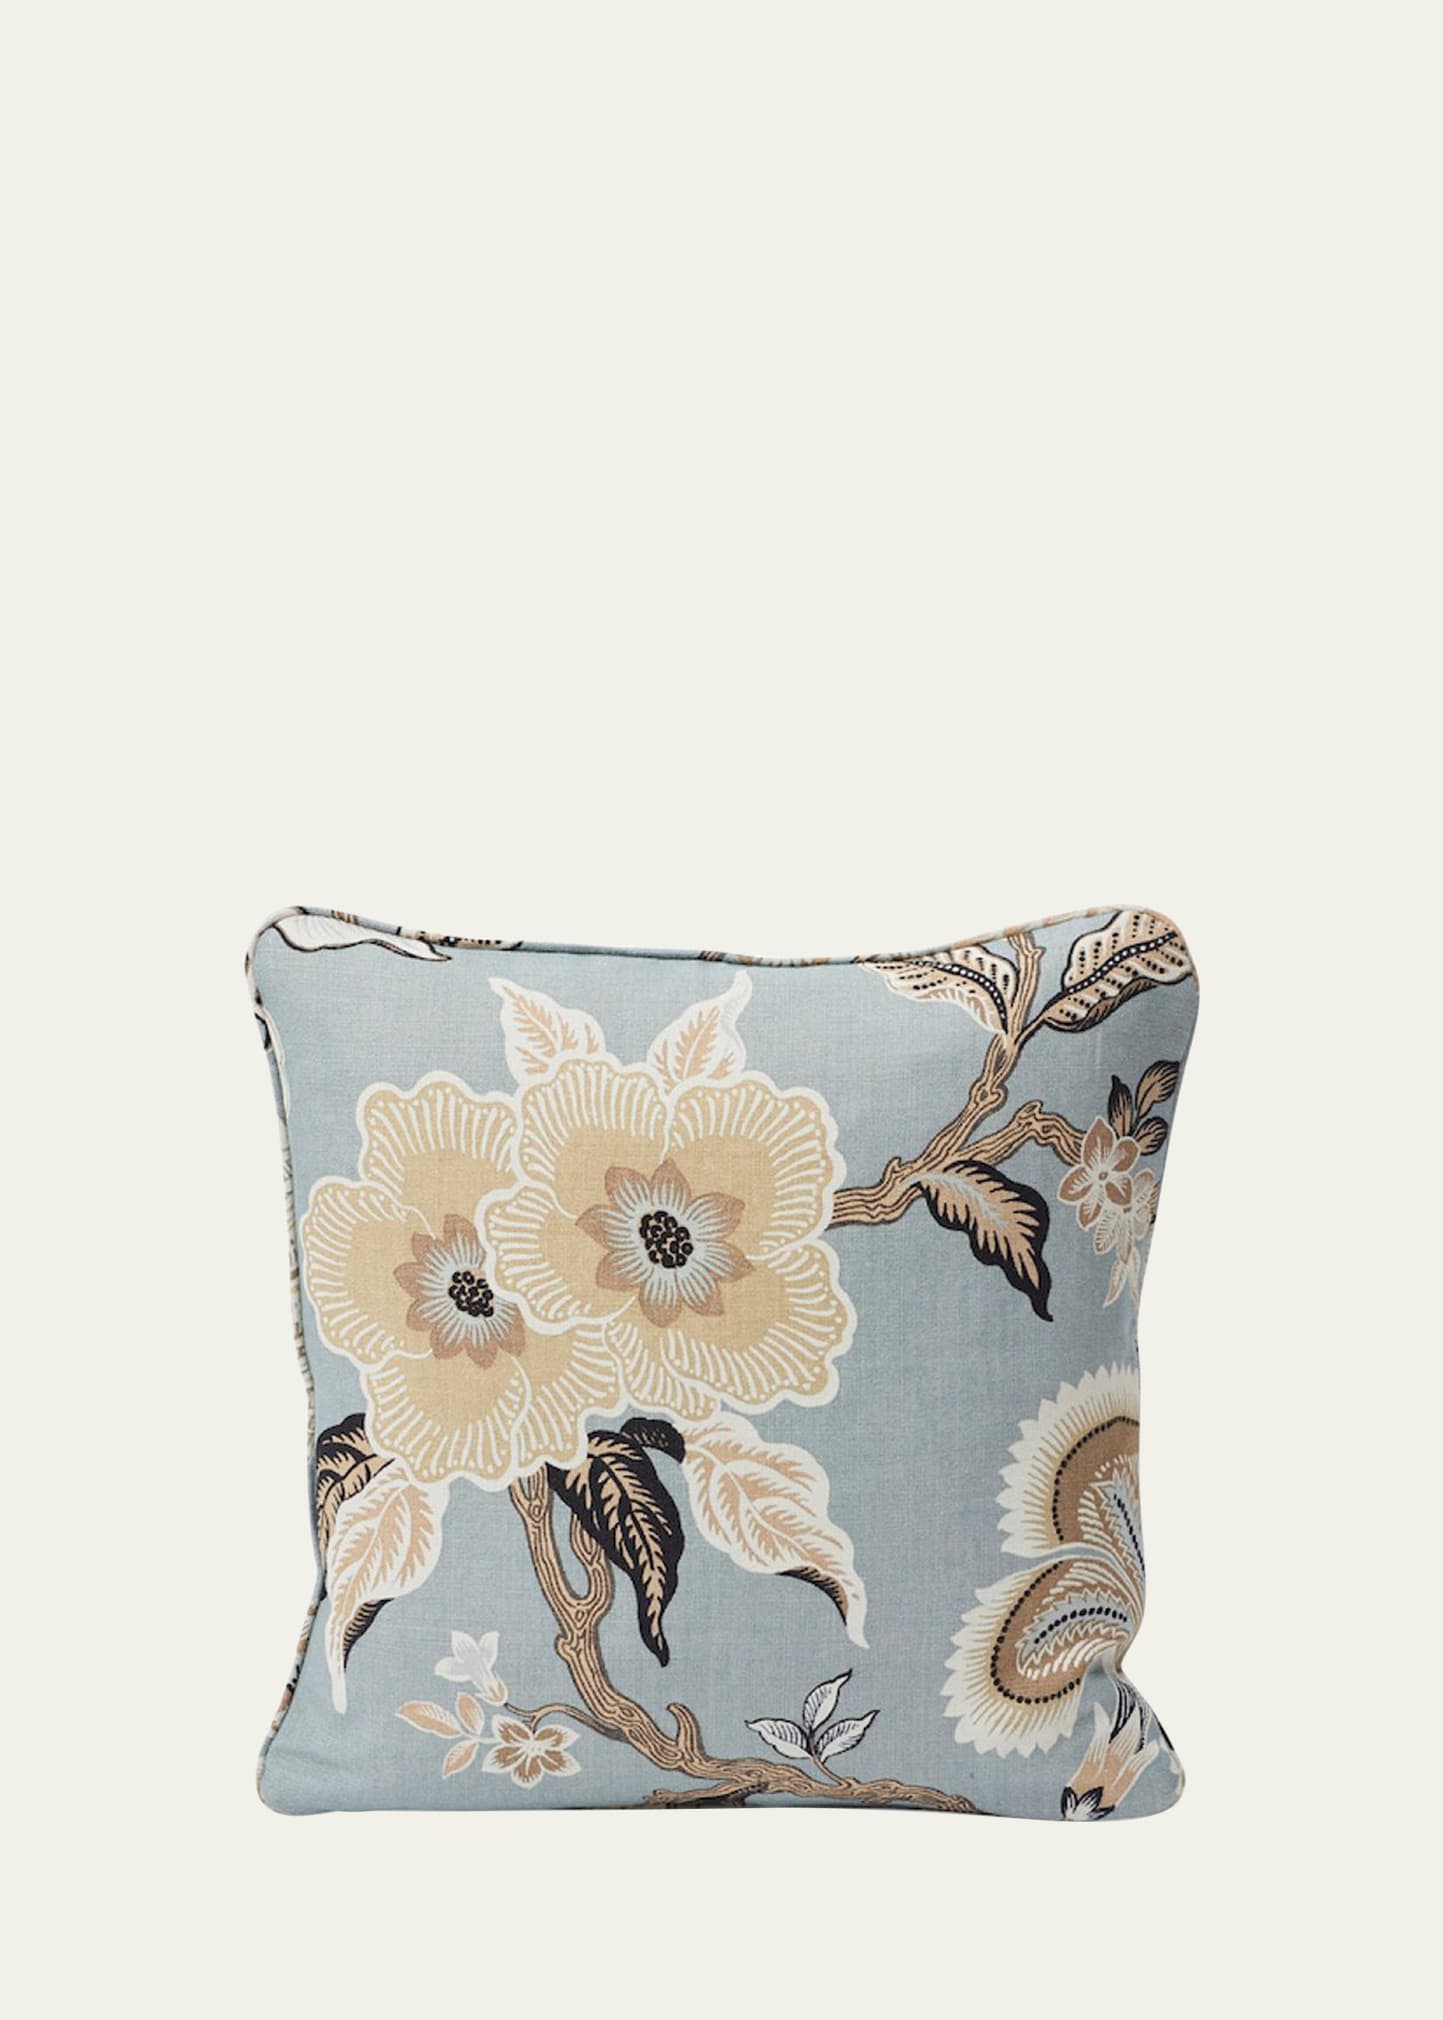 Schumacher Hothouse Flowers Pillow, 18"sq. In Mineral